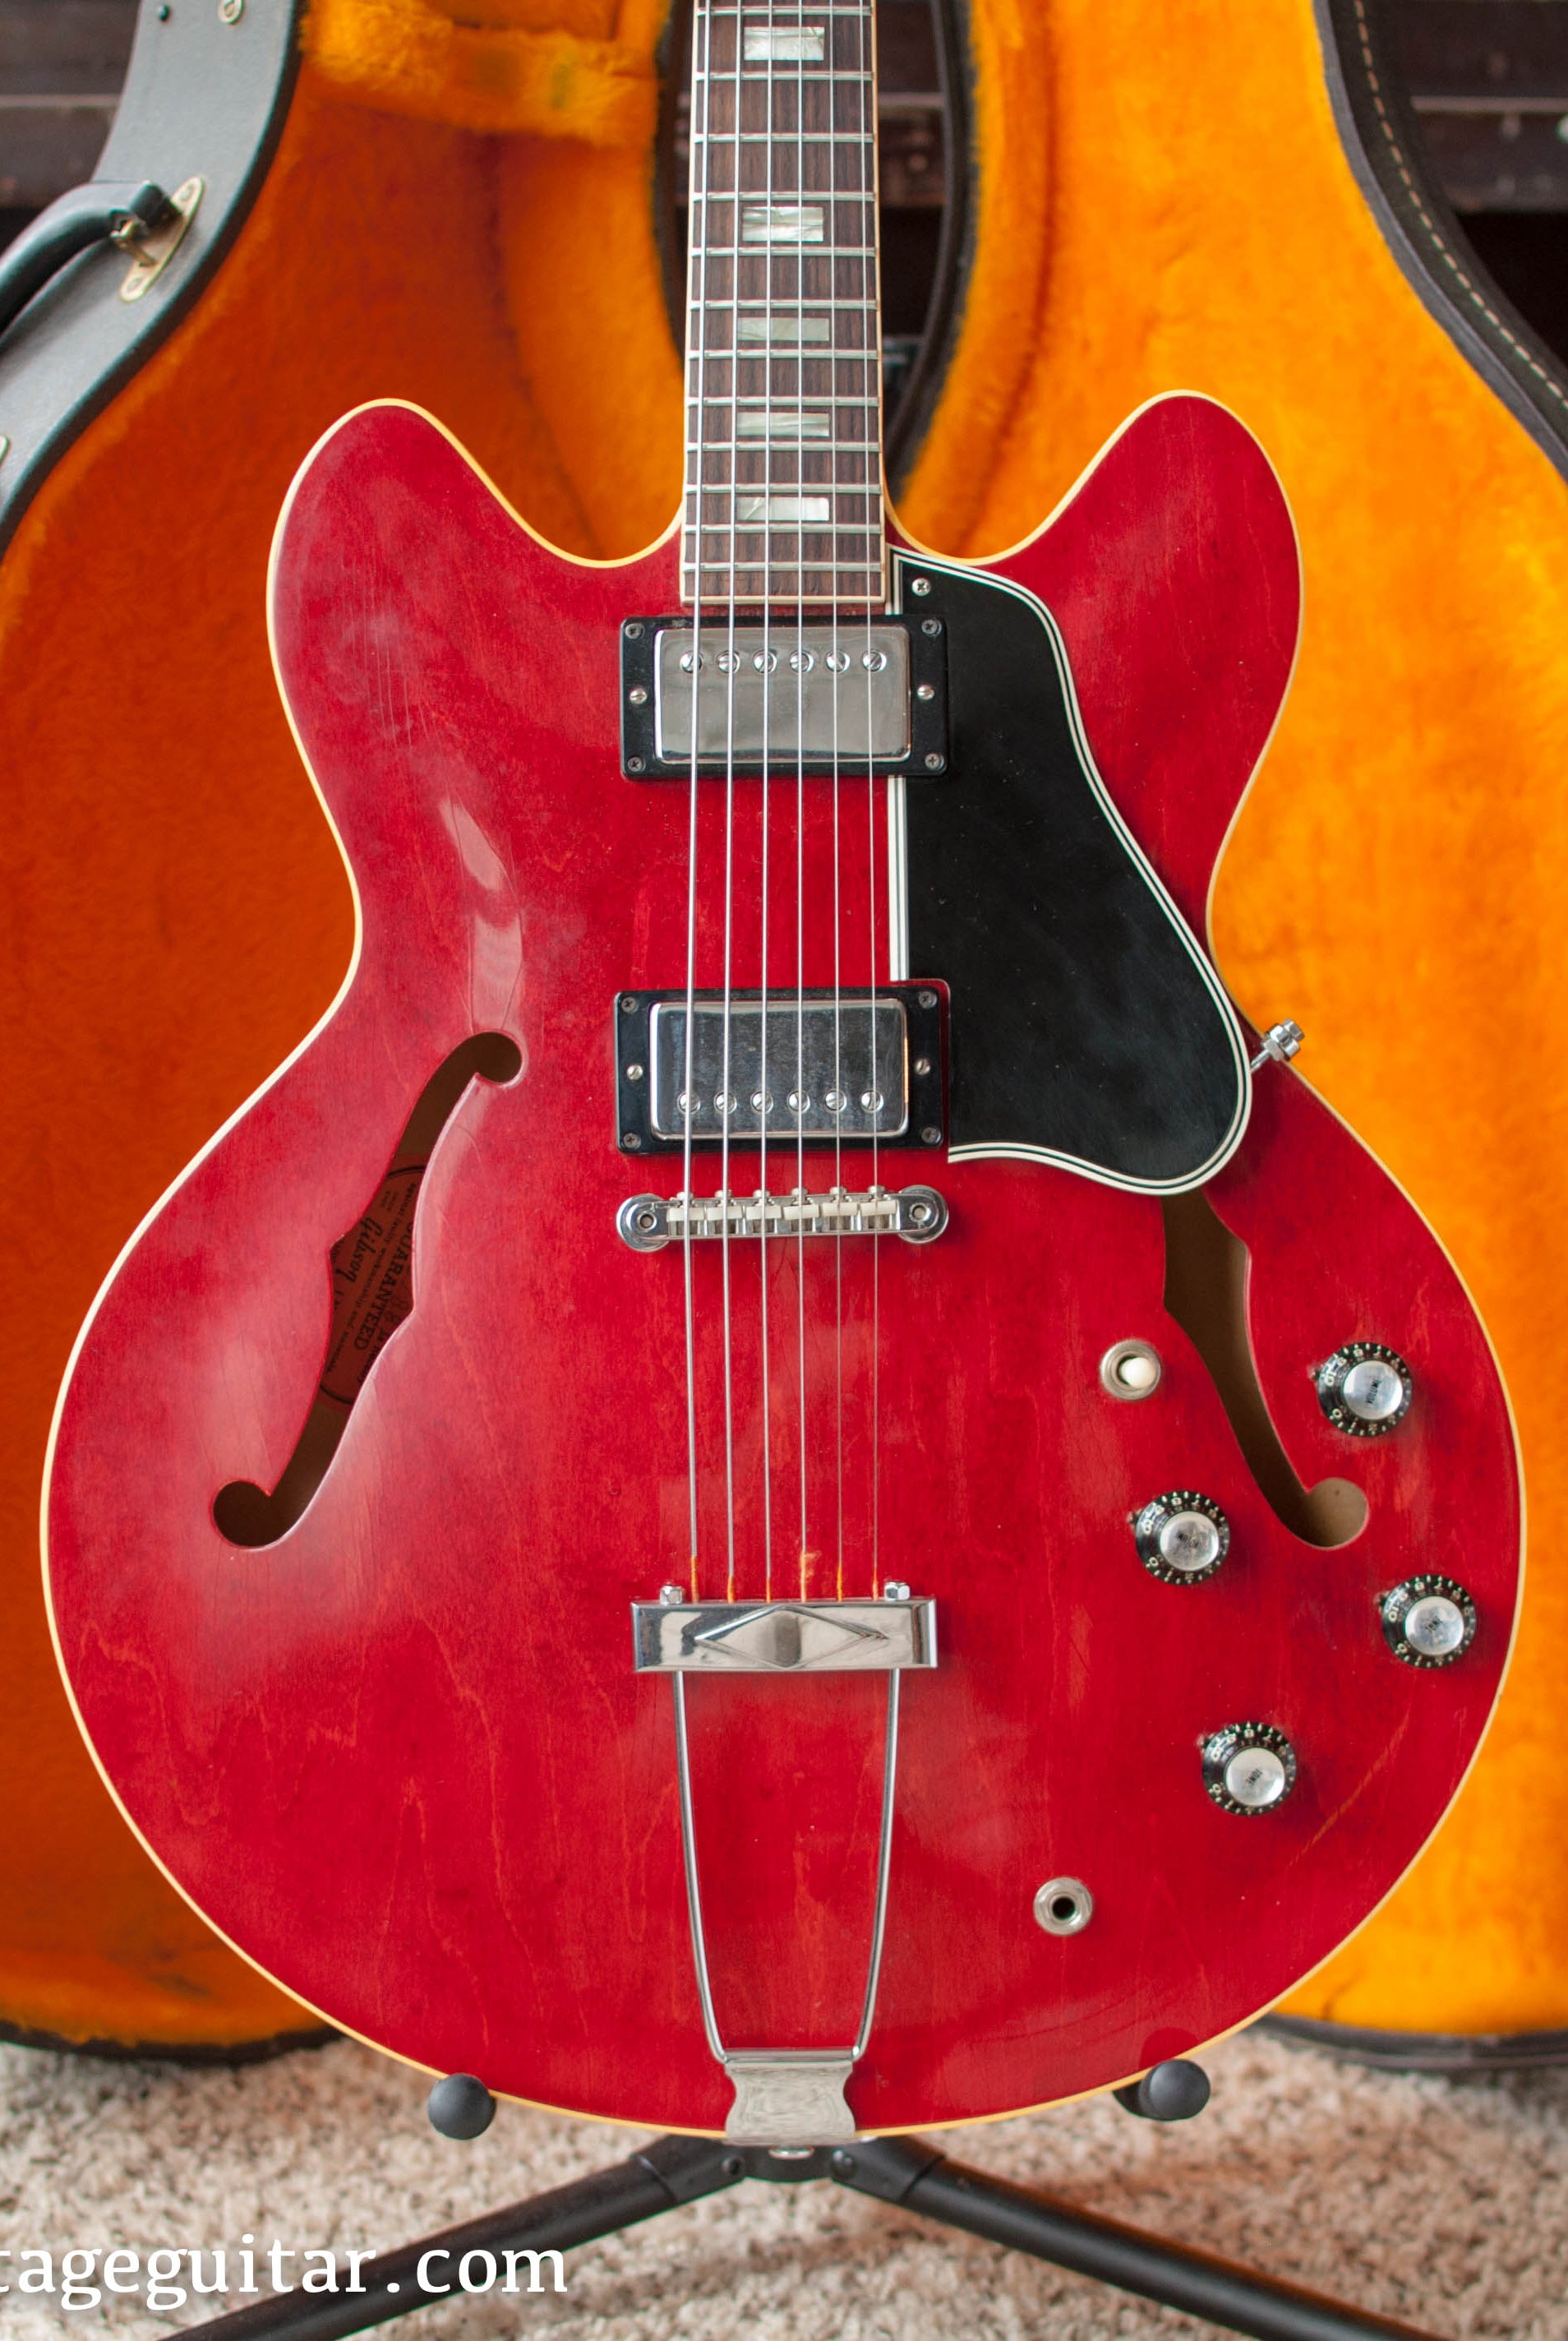 1966 Gibson ES-335 red electric guitar